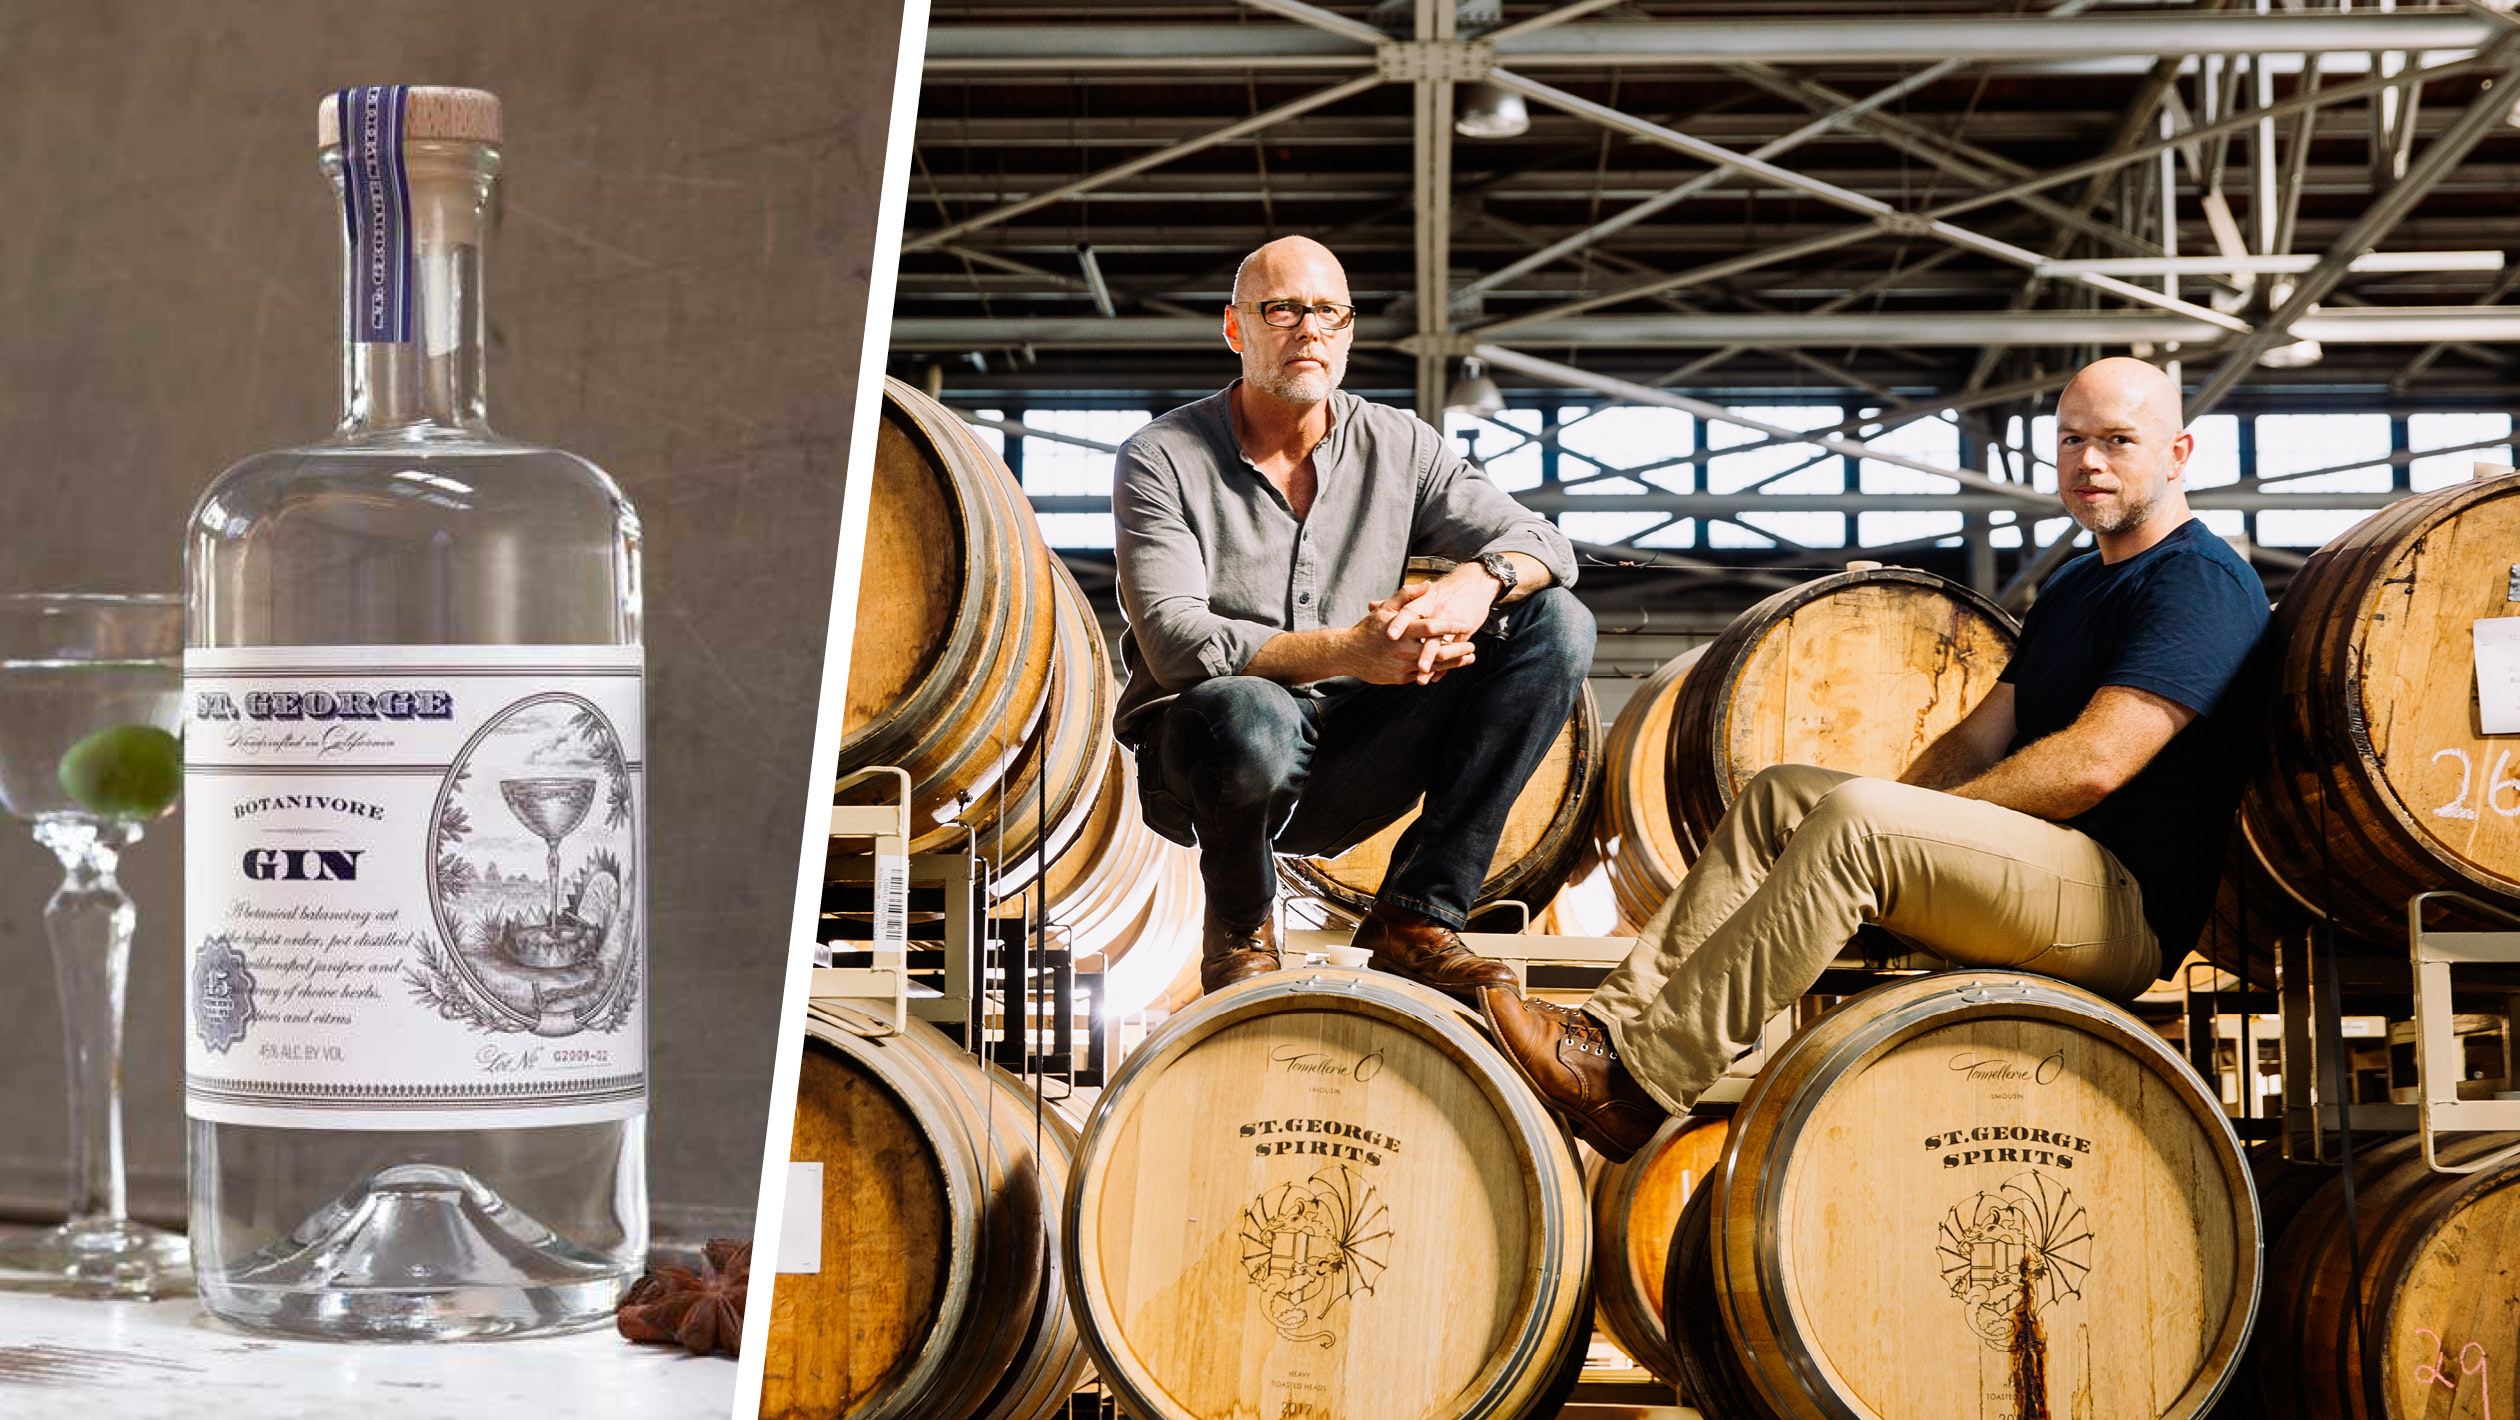 Left: a bottle of St. George Spirits gin; right: Lance Winters and Dave Smith pose on top of St. George Spirits barrels.